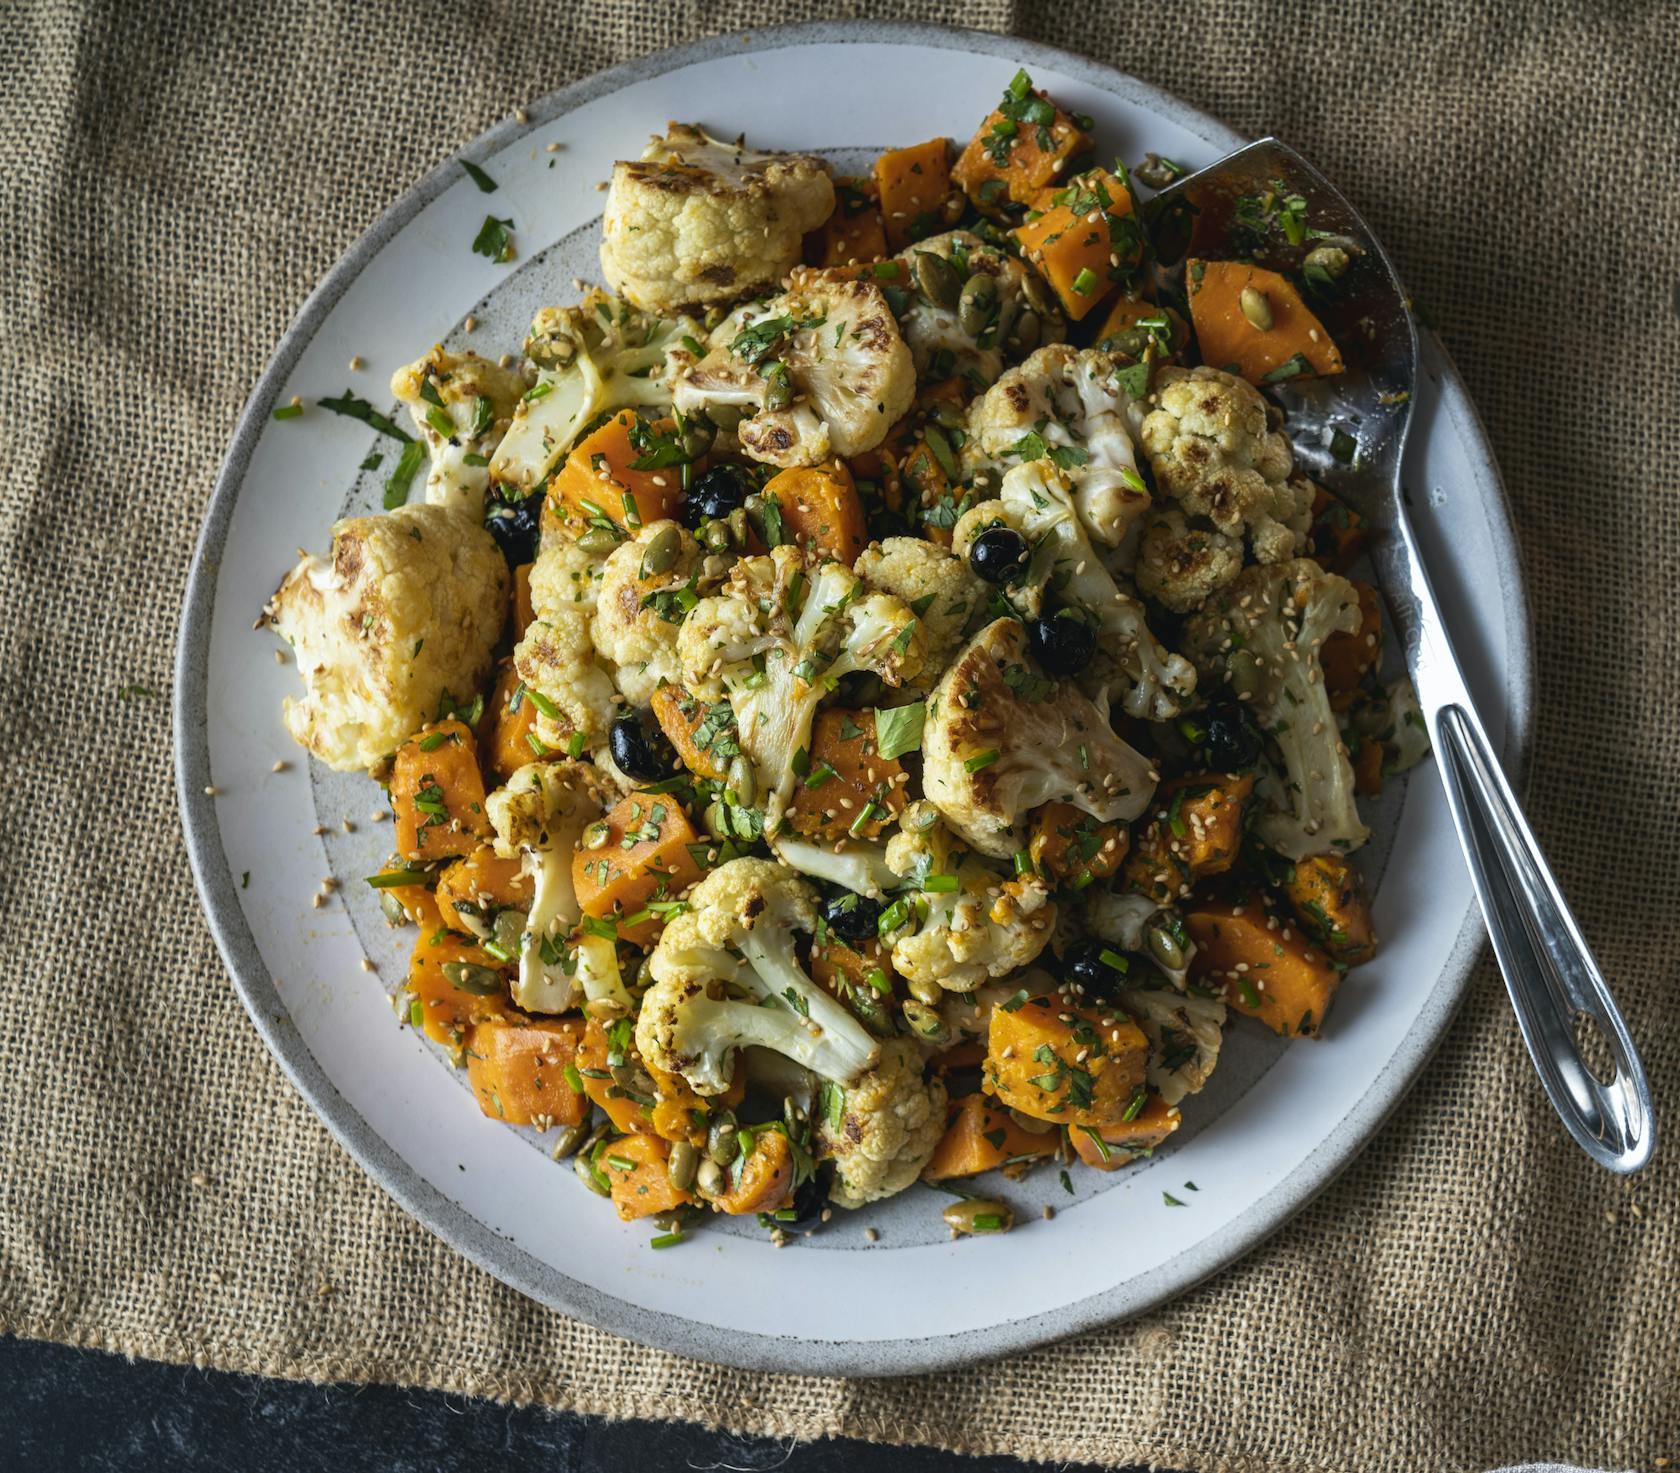 Blistered Cauliflower Salad with Smoked Sweet Potatoes and Pumpkin Seeds